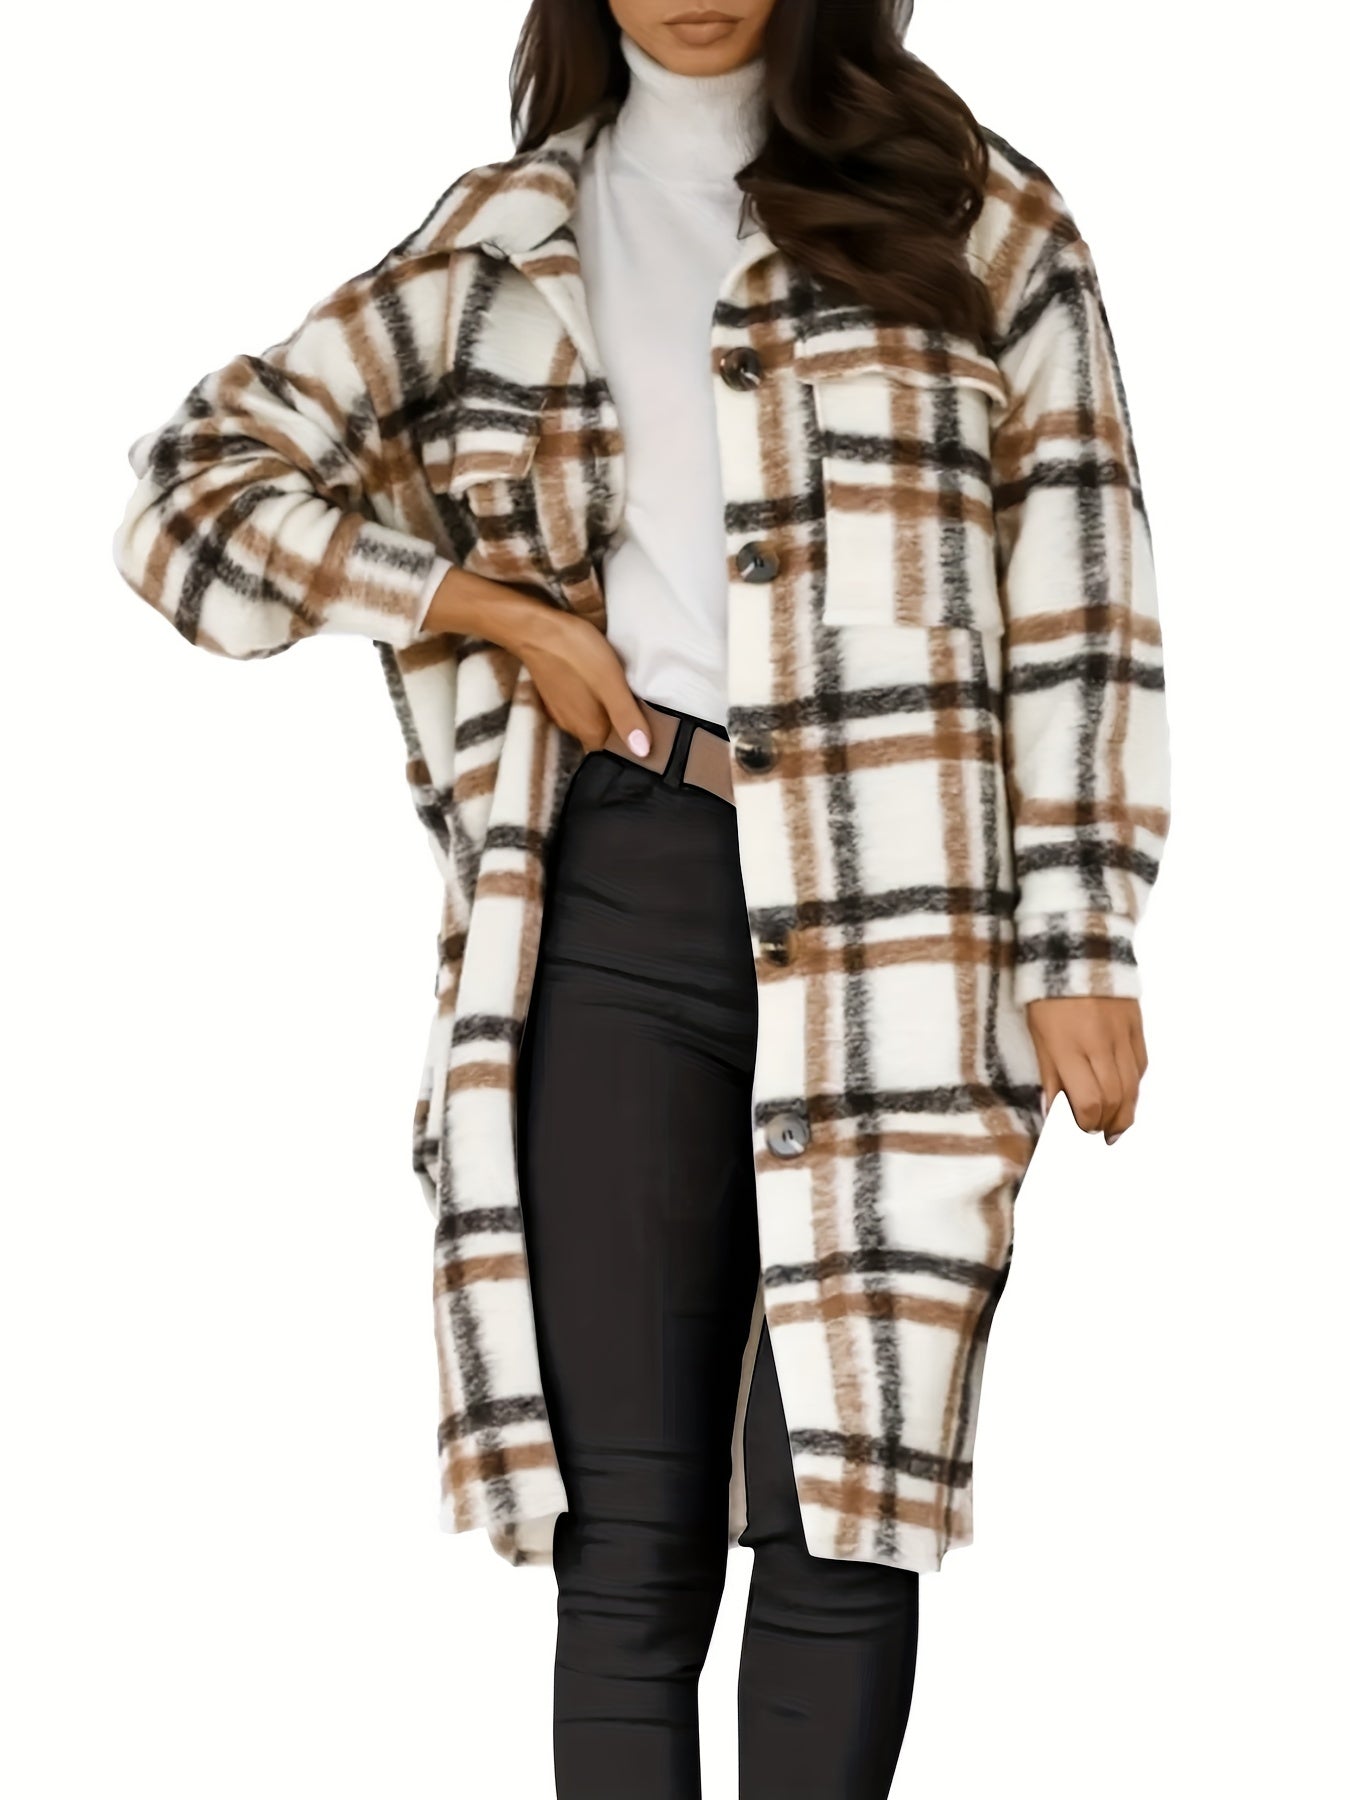 Plaid Print Shacket Jacket, Casual Button Front Turn Down Collar Long Sleeve Mid Length Outerwear, Women's Clothing